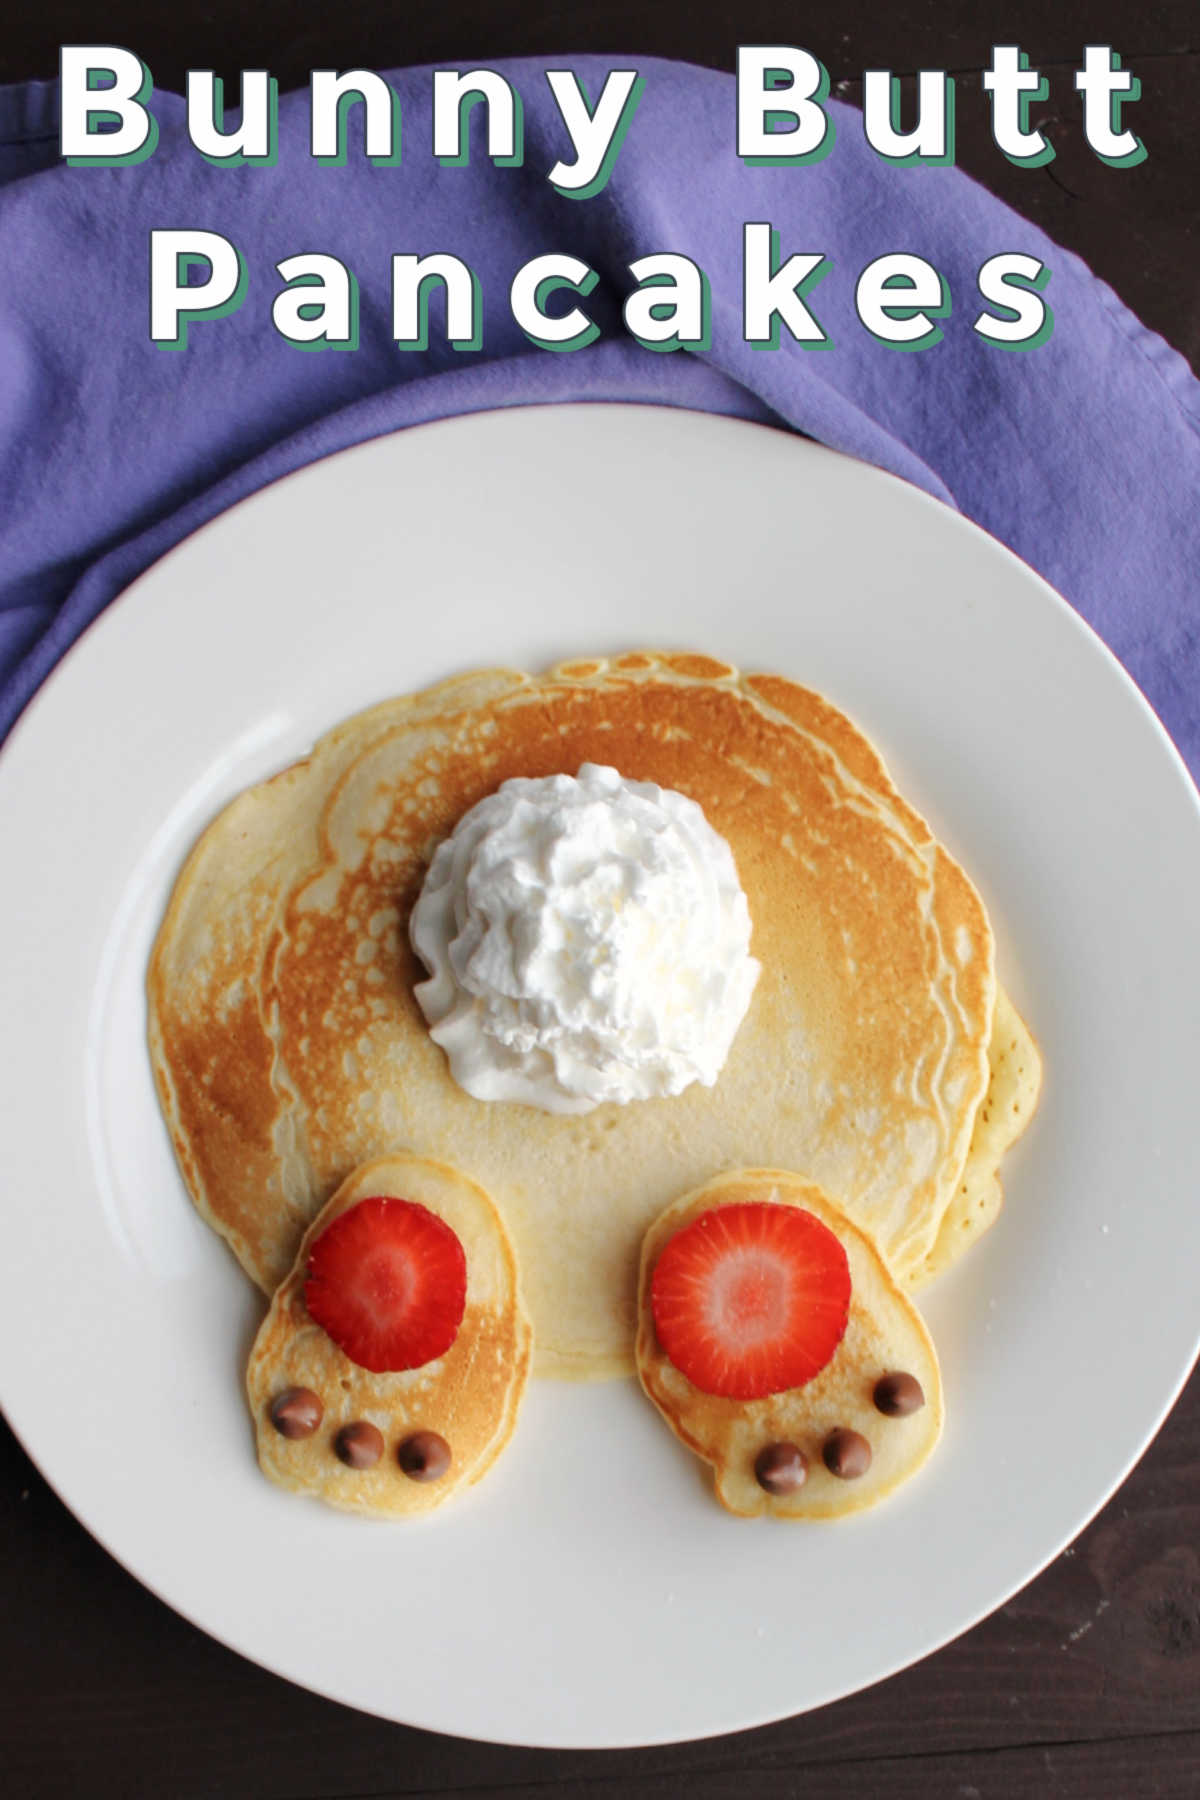 These bunny butt pancakes are cute as can be and they come together so quickly.  What a great way to treat your family on Easter morning!